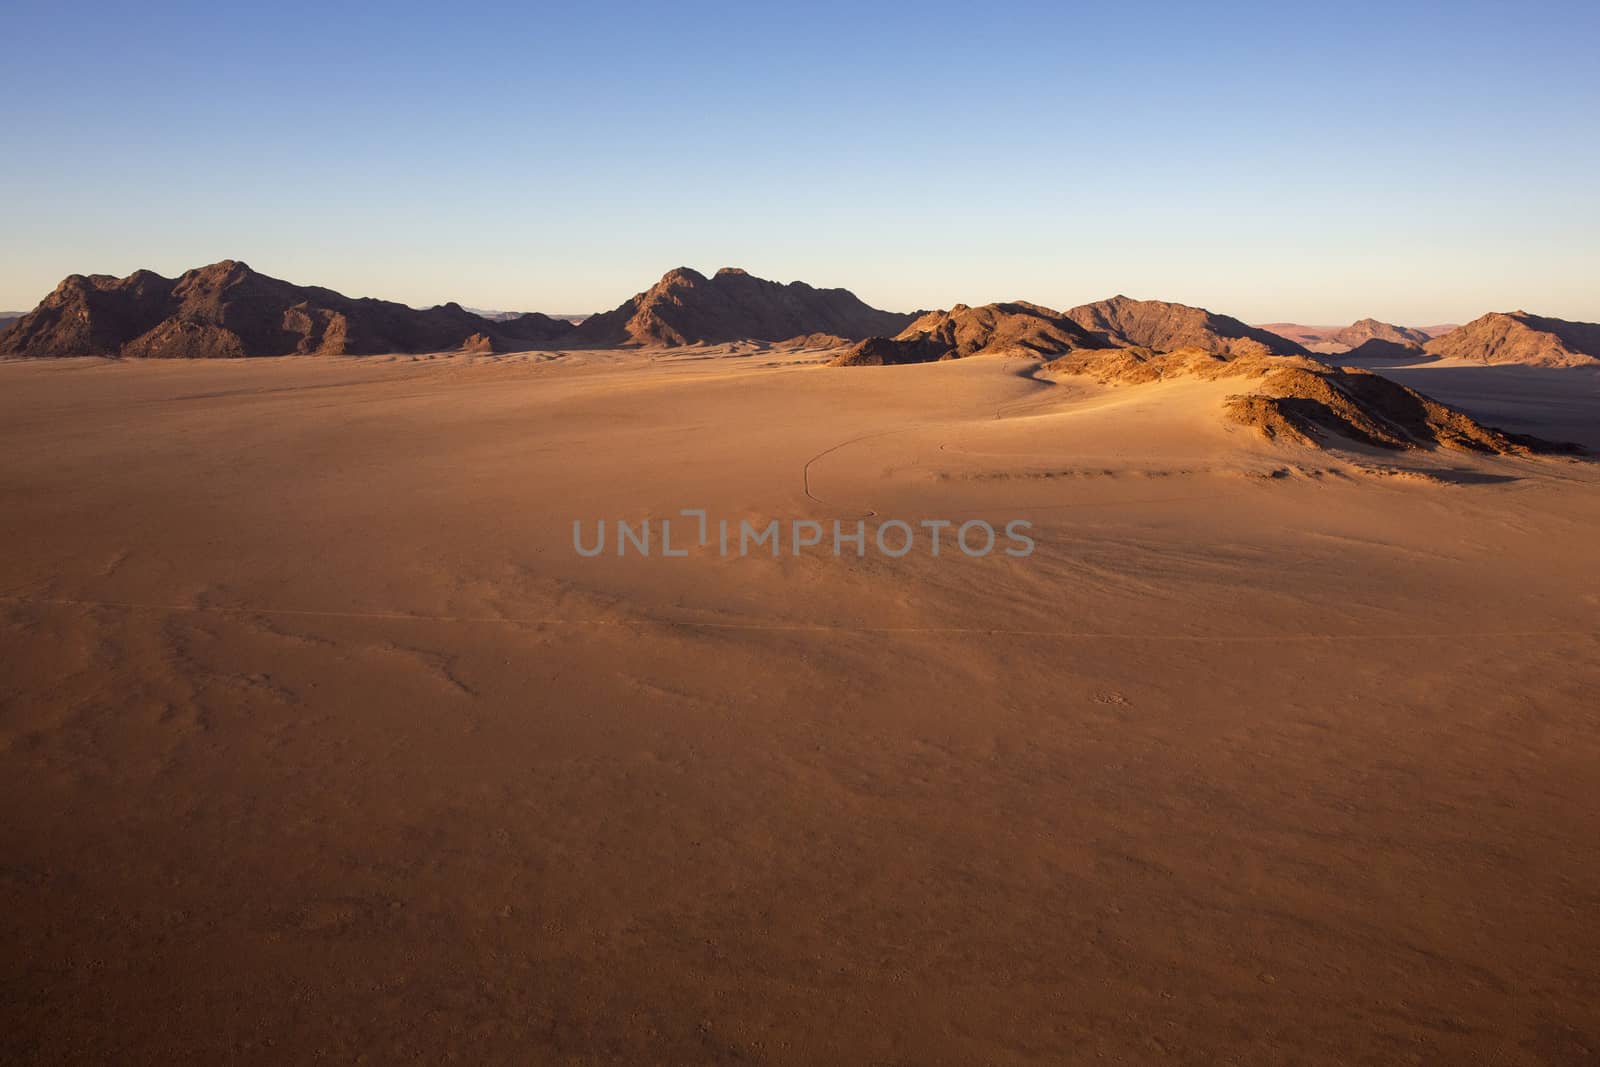 Aerial view from a Hot Air Balloon in the Sossusvlei area of the Namib-Naukluft Desert in Namibia, Africa